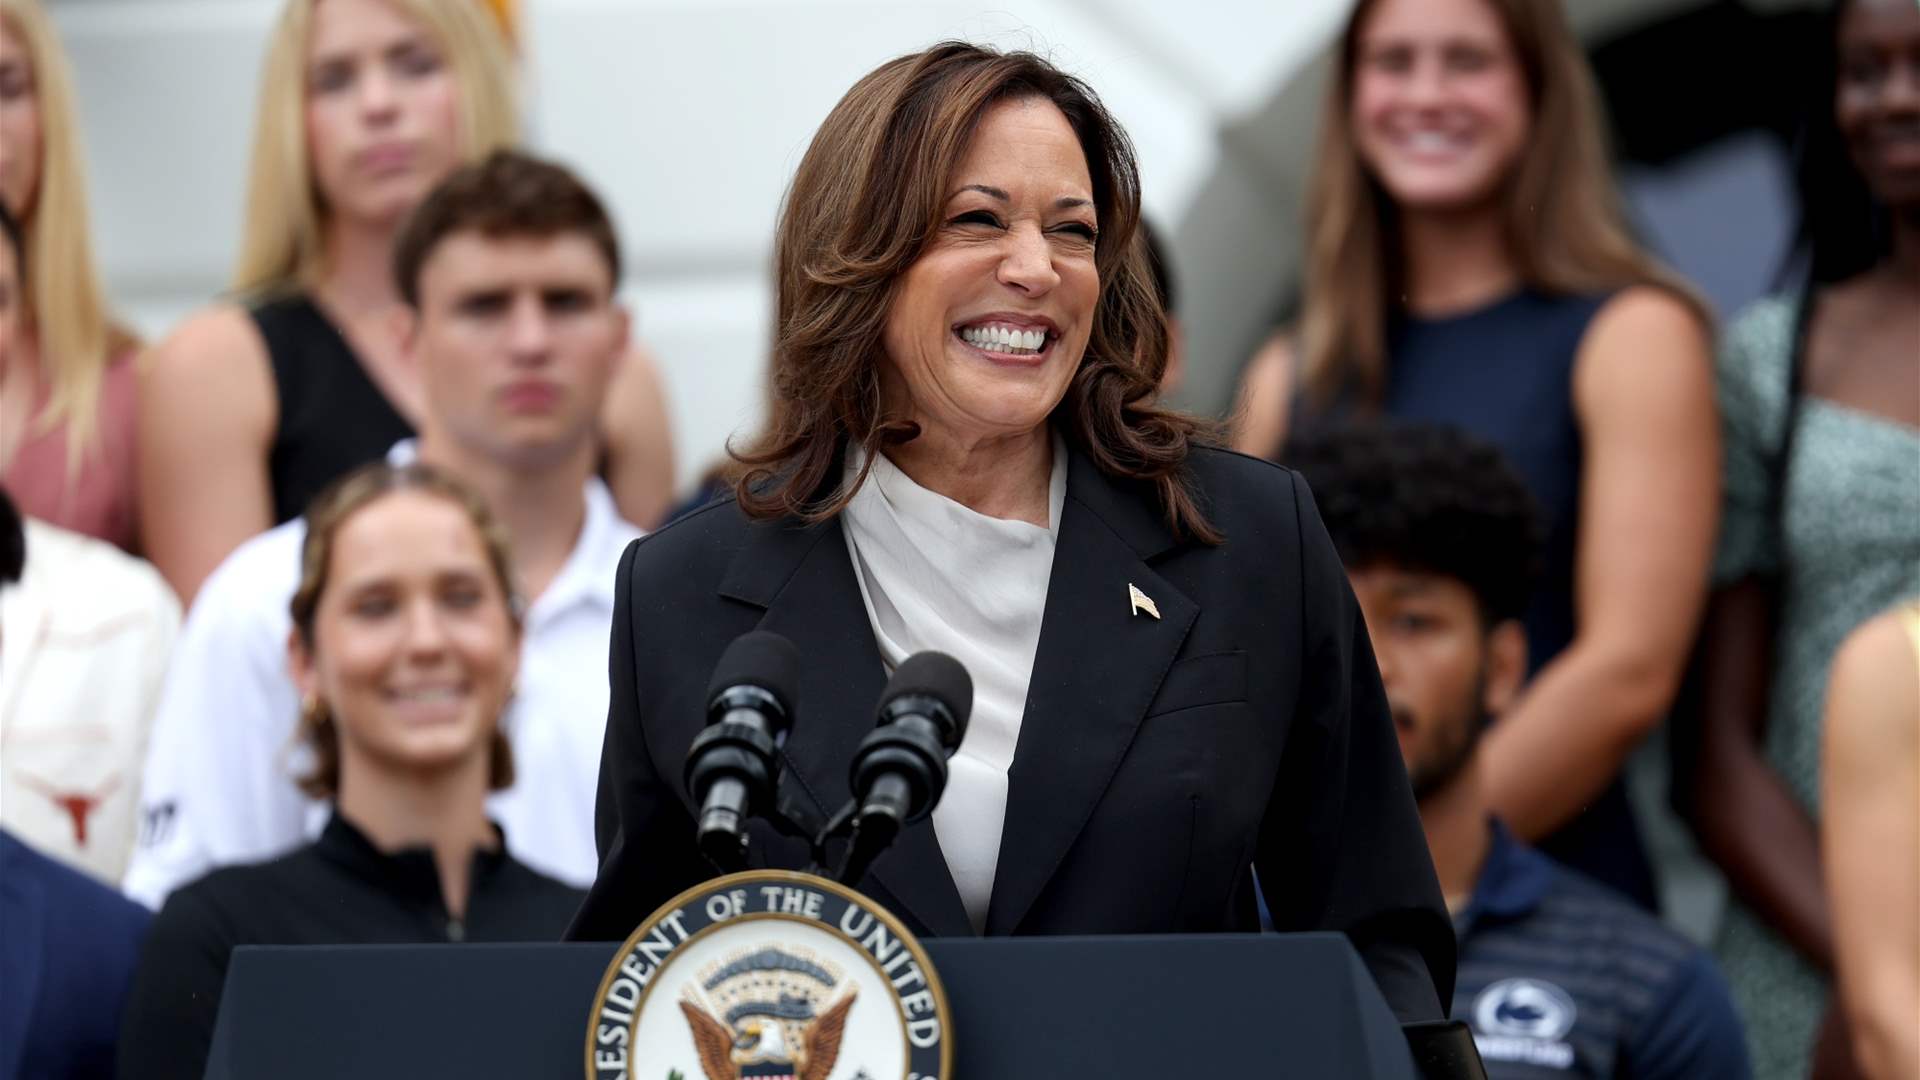 Kamala Harris steps up: A new chapter for the Democratic Party in the US presidential race